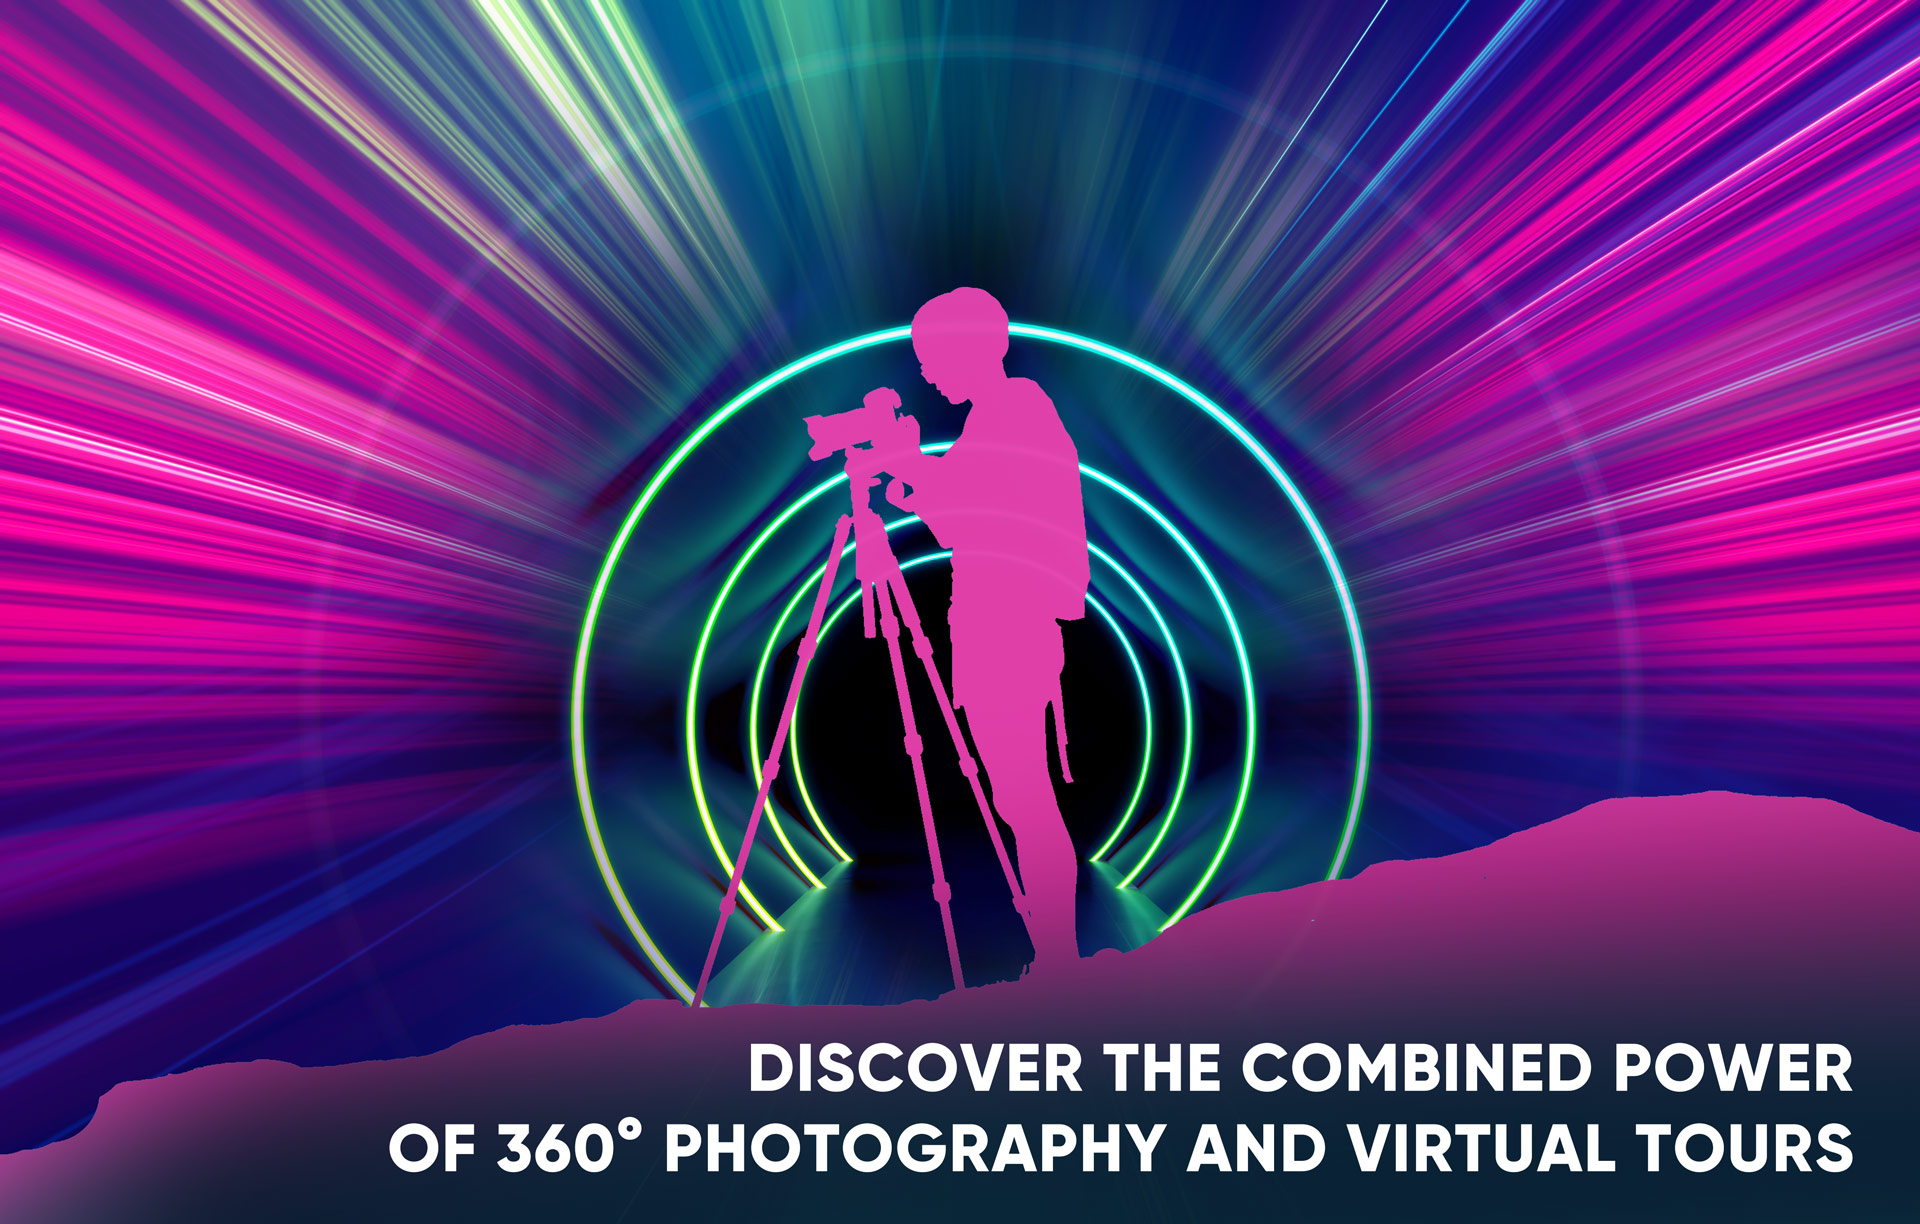 discover-the-combined-power-of-360-degree-photography-and-virtual-tours-from-vr-easy-1920